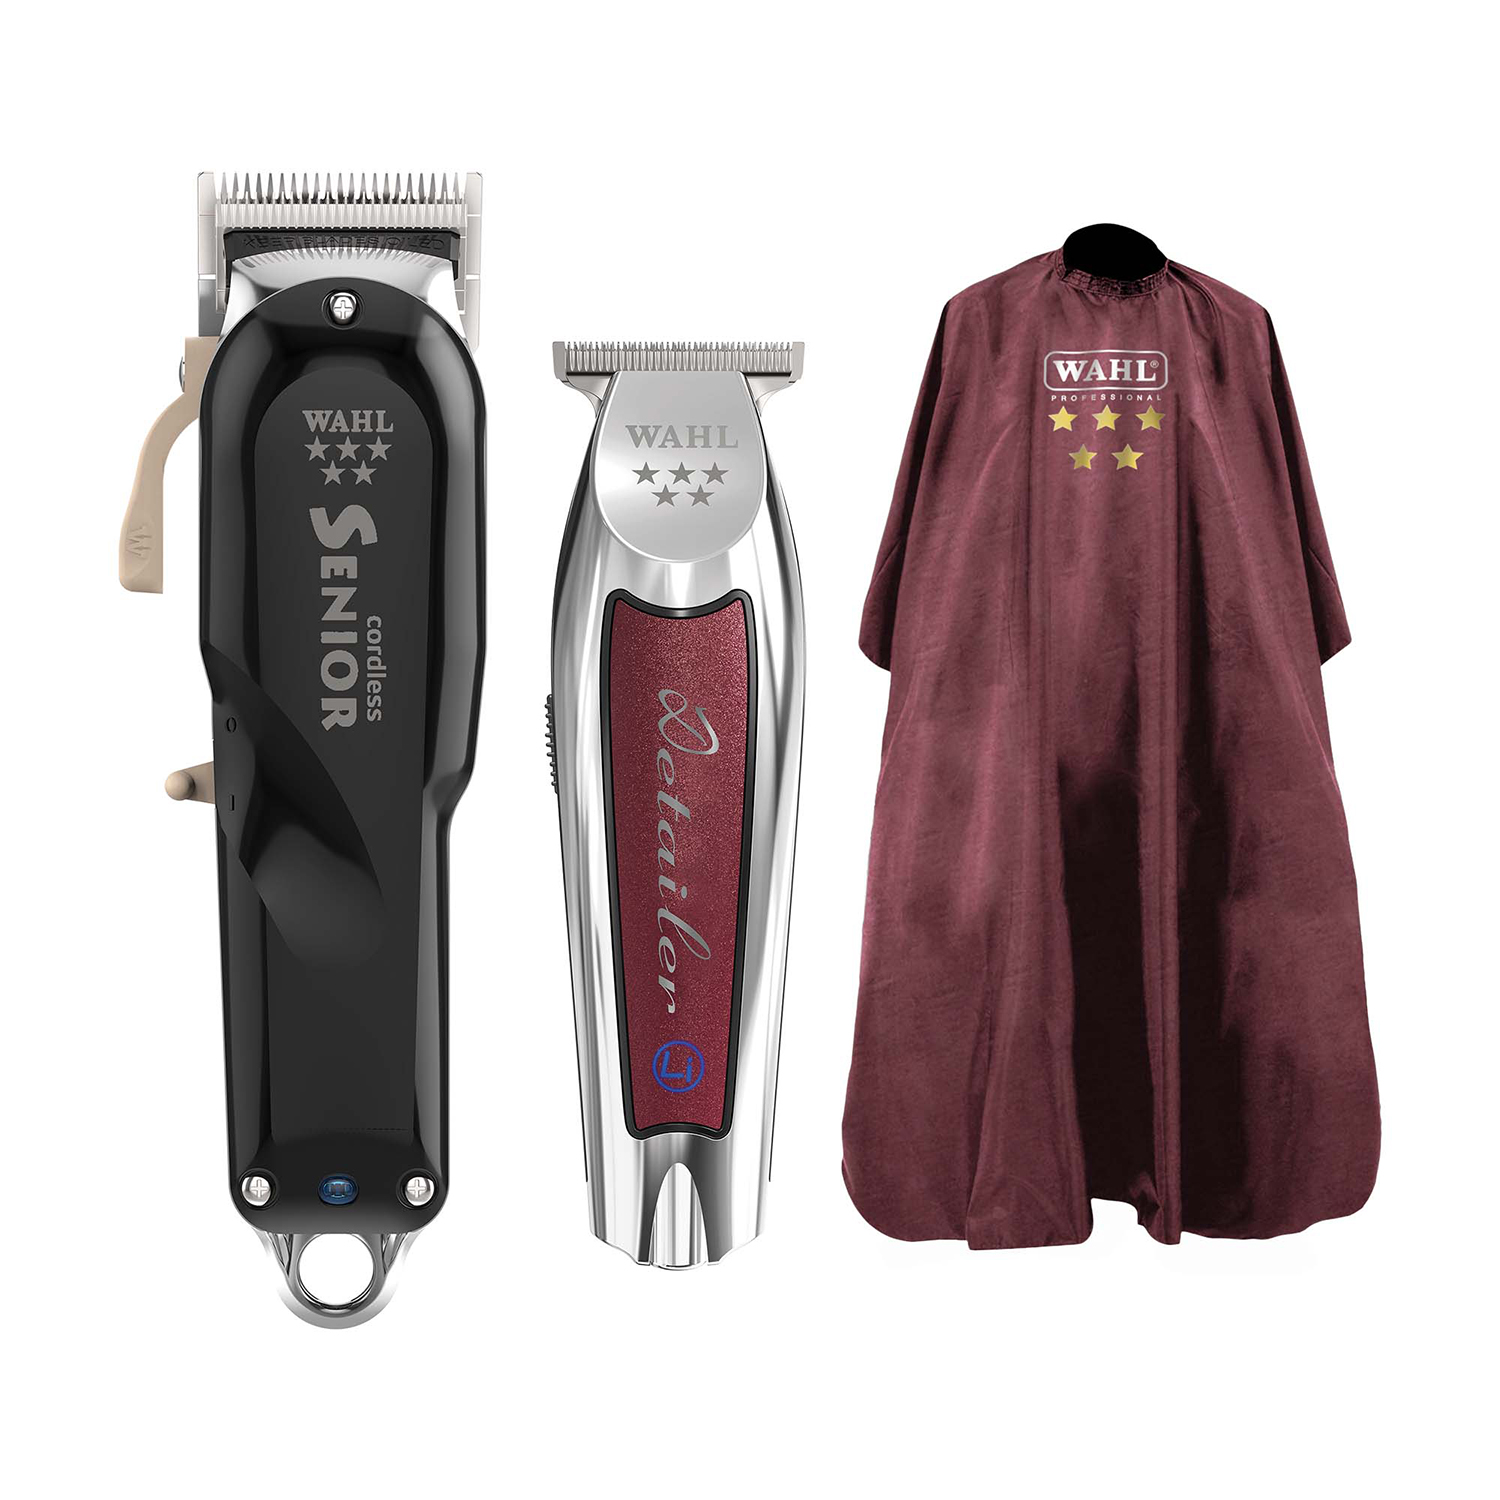 【SALE／91%OFF】 Wahl USA Pro Series Premium Combo Corded Clipper and Cordless Trimmer Kit for Hair Clipping ＆ Beard Trimming with Free Barbers Shears Model 79804